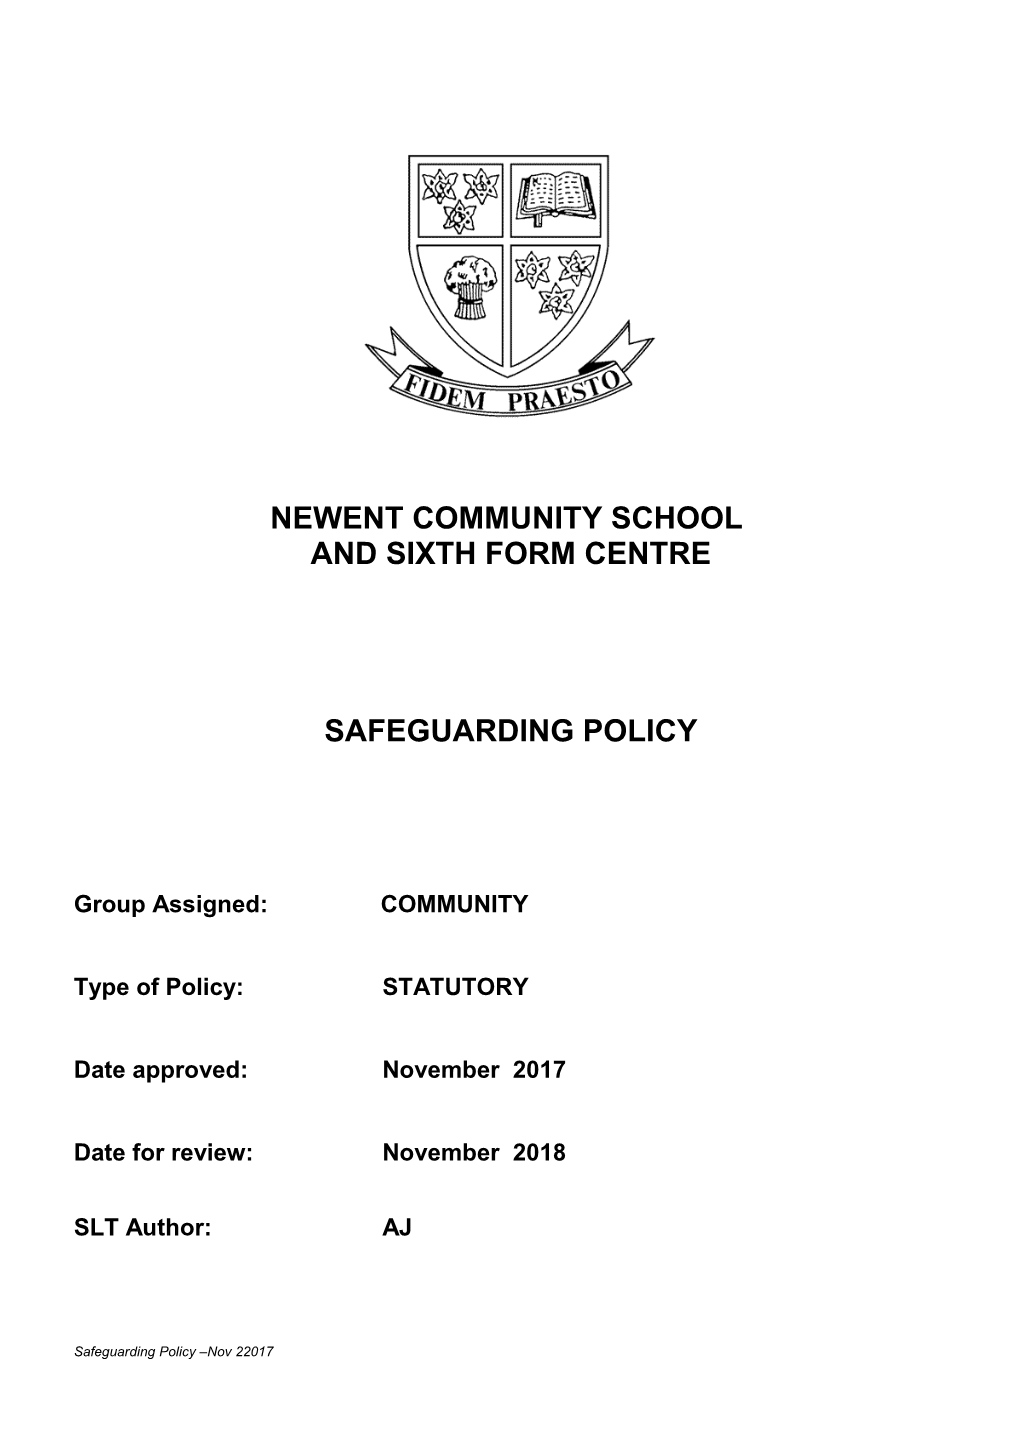 Safeguarding Policy for Newent Community School and Sixth Form Centre